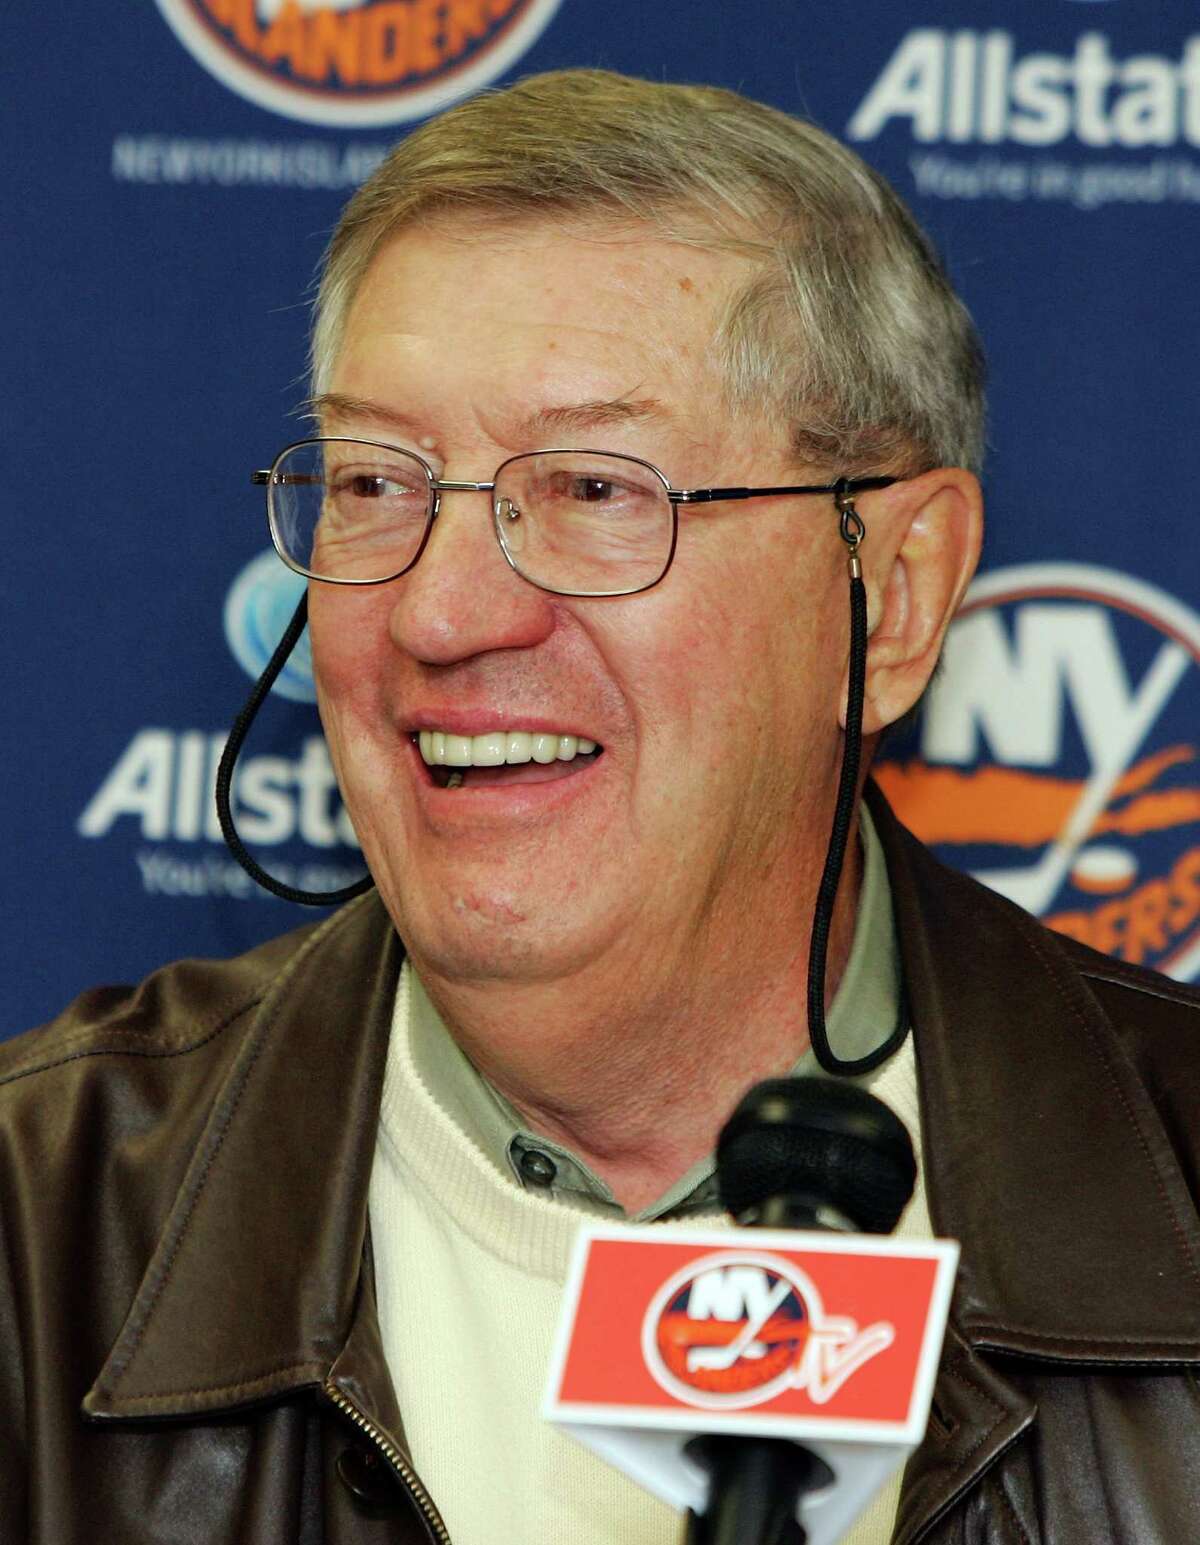 FILE - AUGUST 28: UNIONDALE, NY - NOVEMBER 02: Hall of Famer and former head coach of the New York Islanders Al Arbour speaks to the media during a press conference on November 2, 2007 at Nassau Coliseum in Uniondale, New York. Arbour signed a one game contract and will coach his 1,500th game for the Islanders on November 3, 2007 against the Pittsburgh Penquins. (Photo by Jim McIsaac/Getty Images)